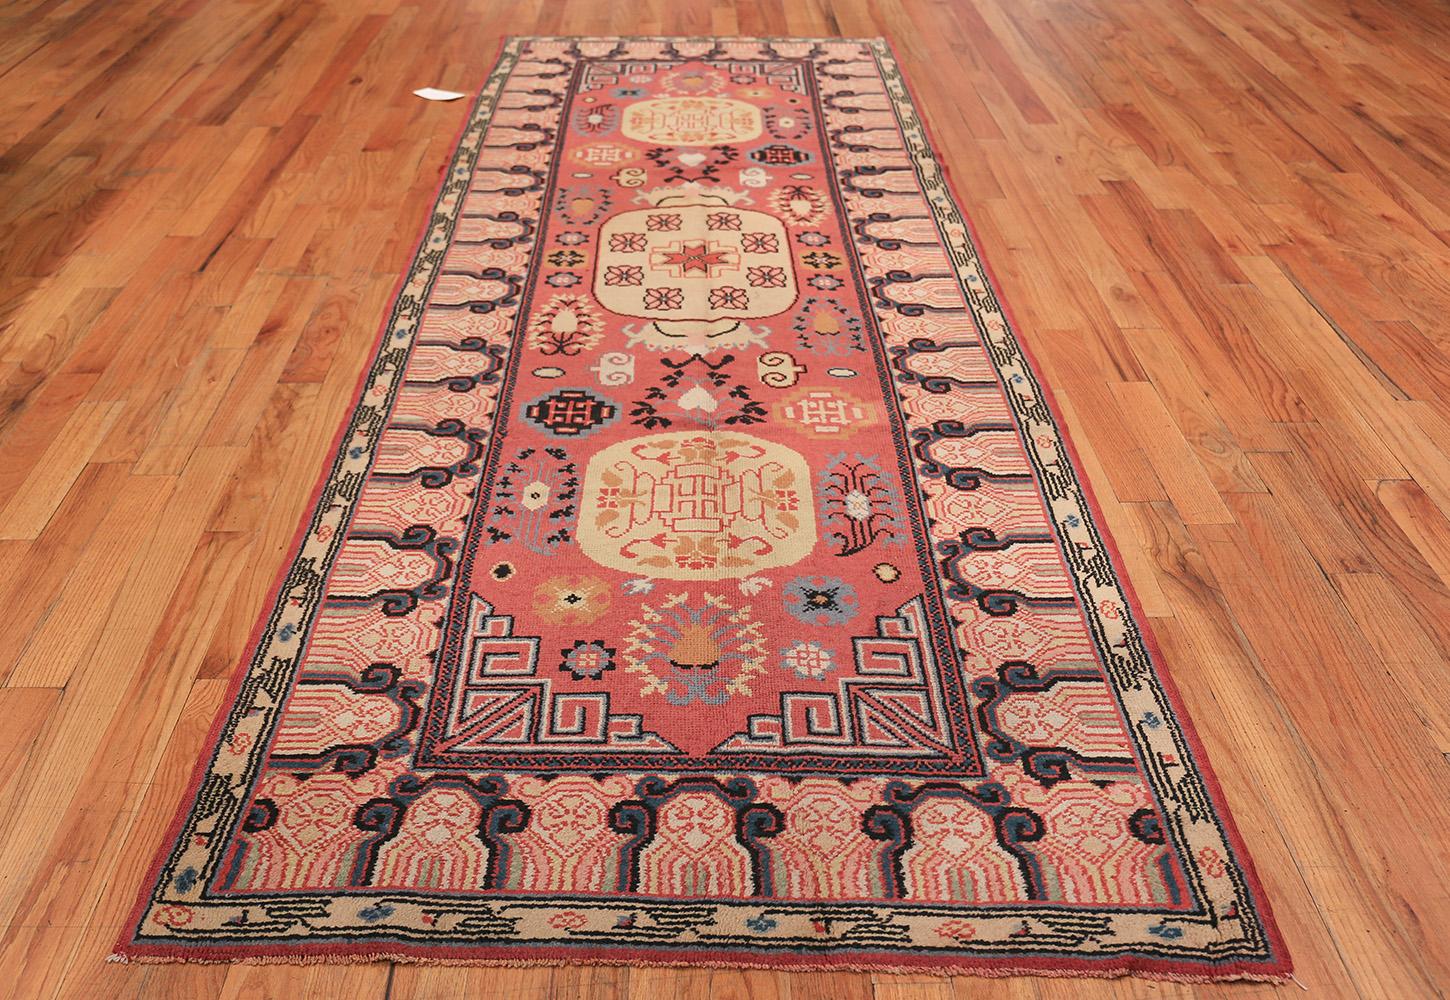 The monumental medallion format is particularly effective on thiAn incomparable antique Khotan from East Turkestan with a richly colored monumental medallion.

Antique Khotan Samarkand Rug, Origin: Persia, Circa: 1900 – This luxurious antique